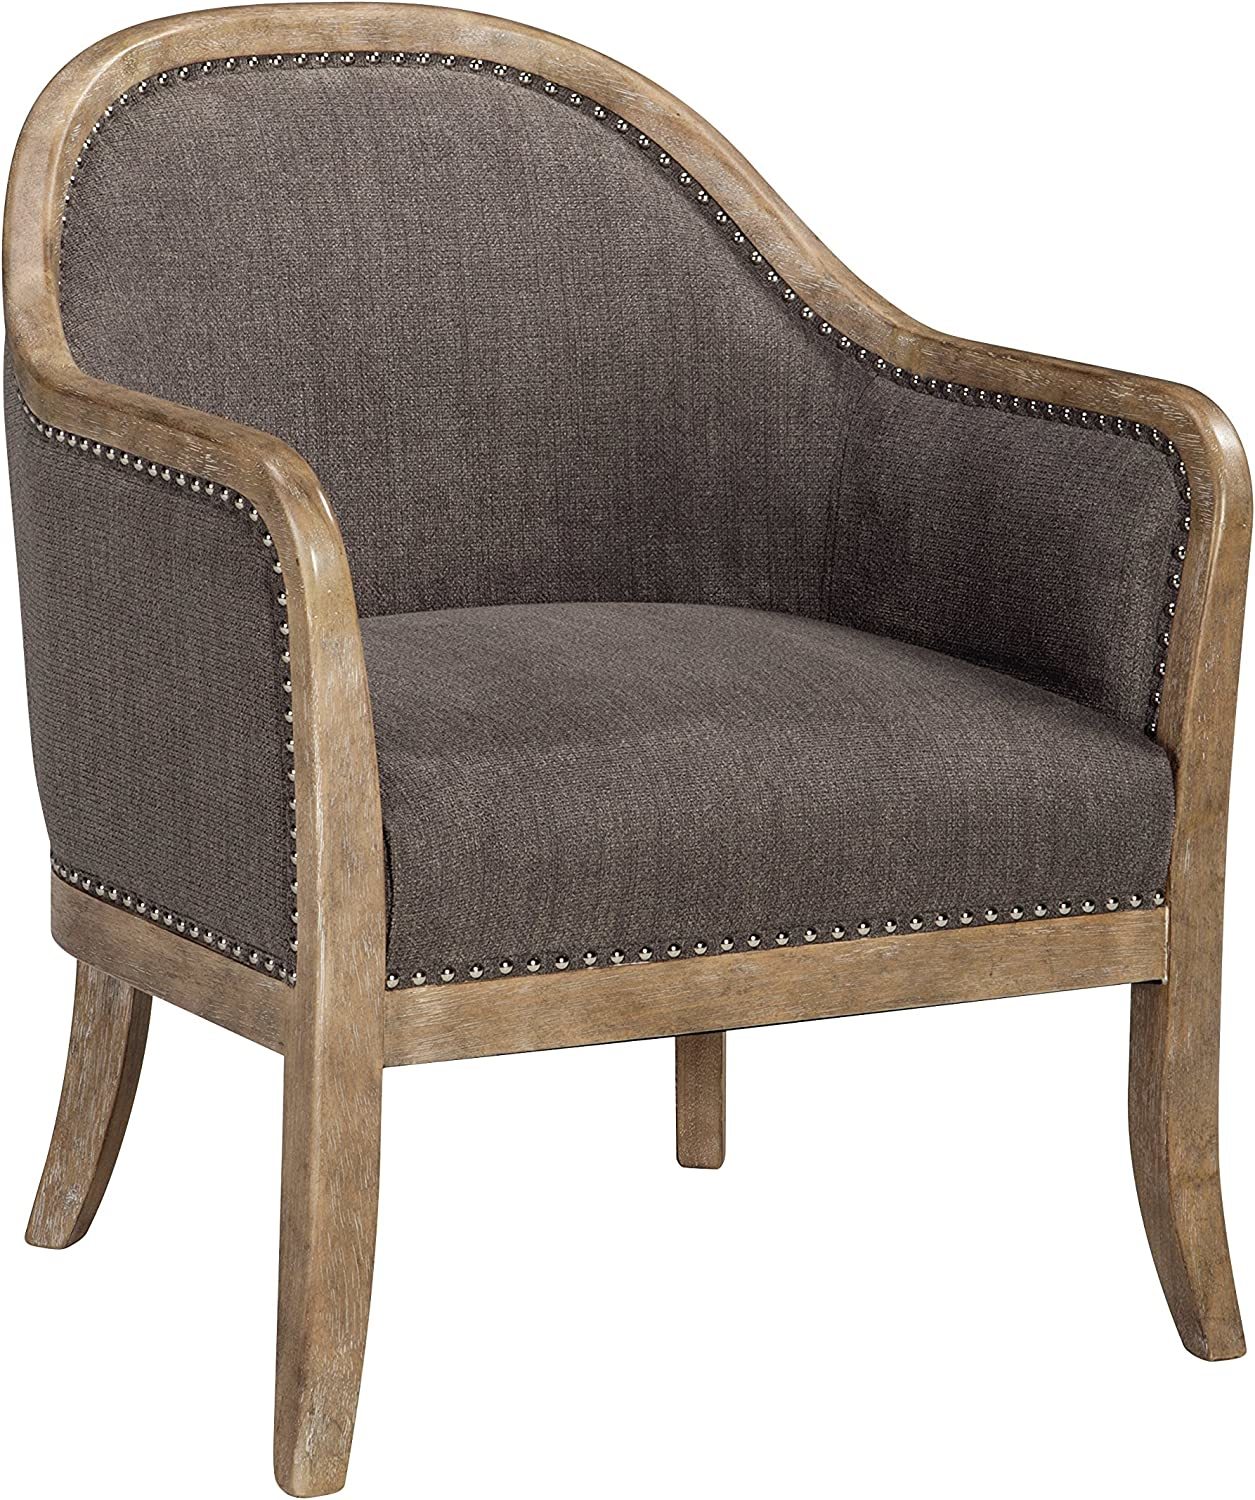 Signature Design by Ashley Engineer Vintage Casual Accent Chair with, Brown - $397.99